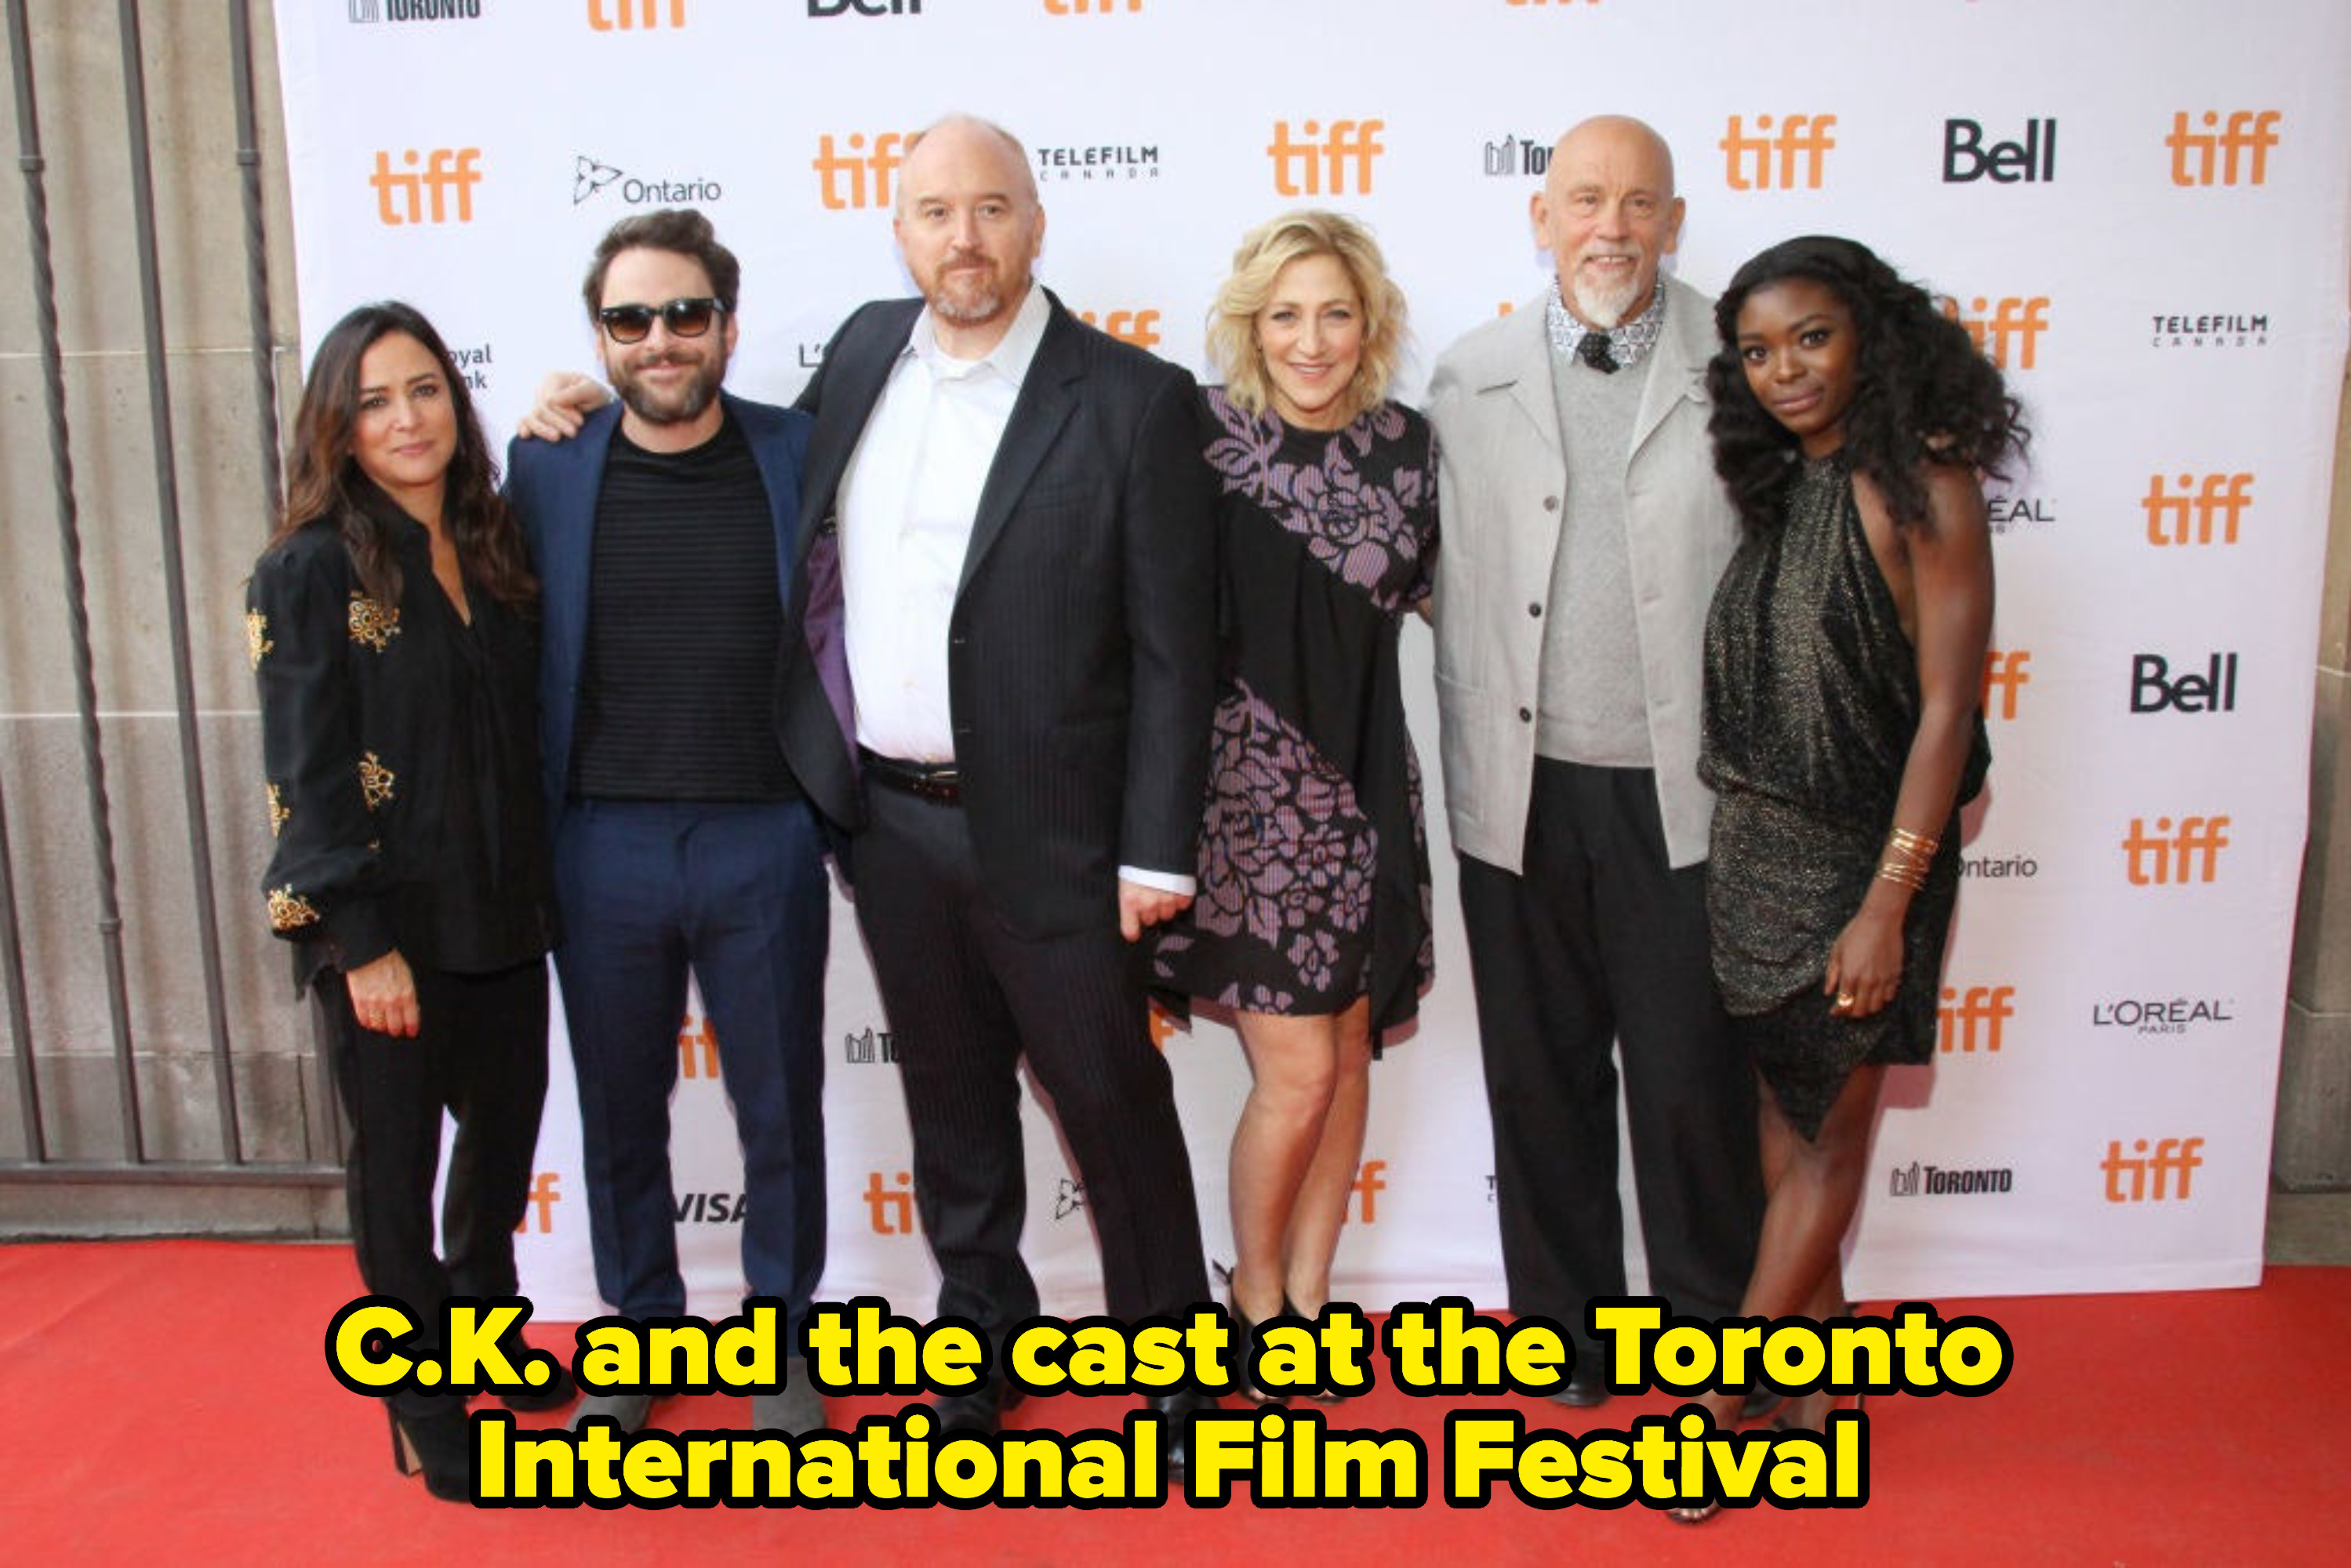 Louis CK and the cast at a film festival